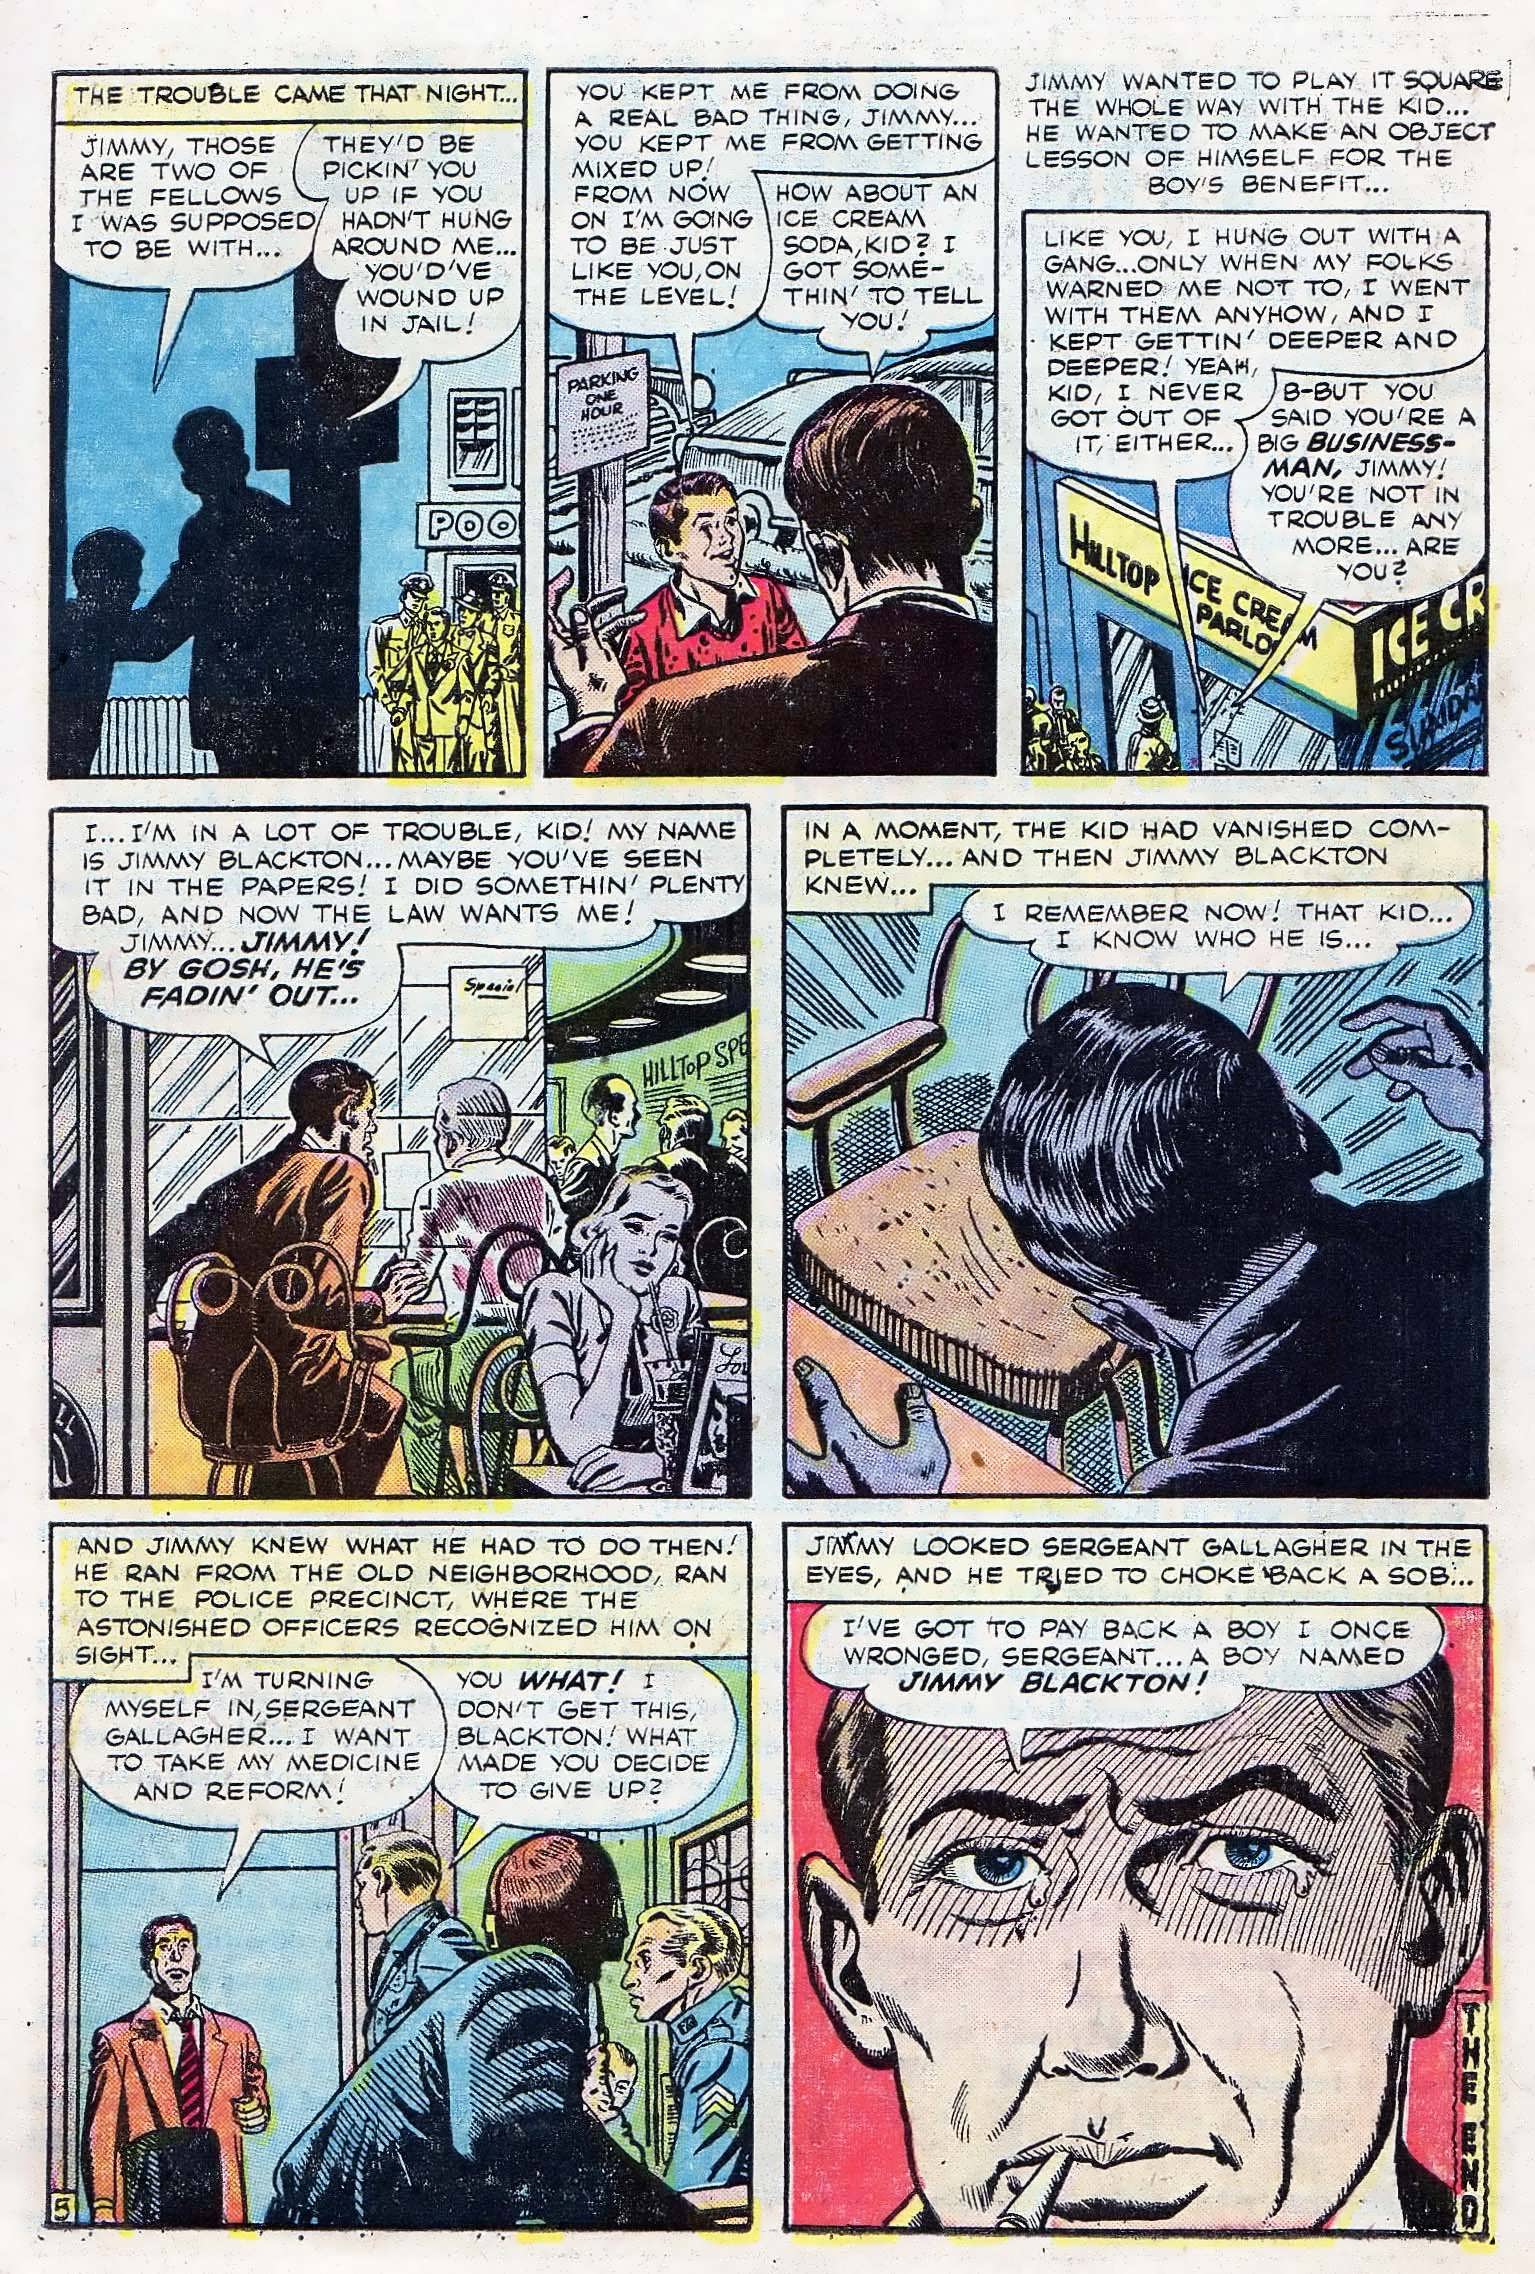 Marvel Tales (1949) 142 Page 6